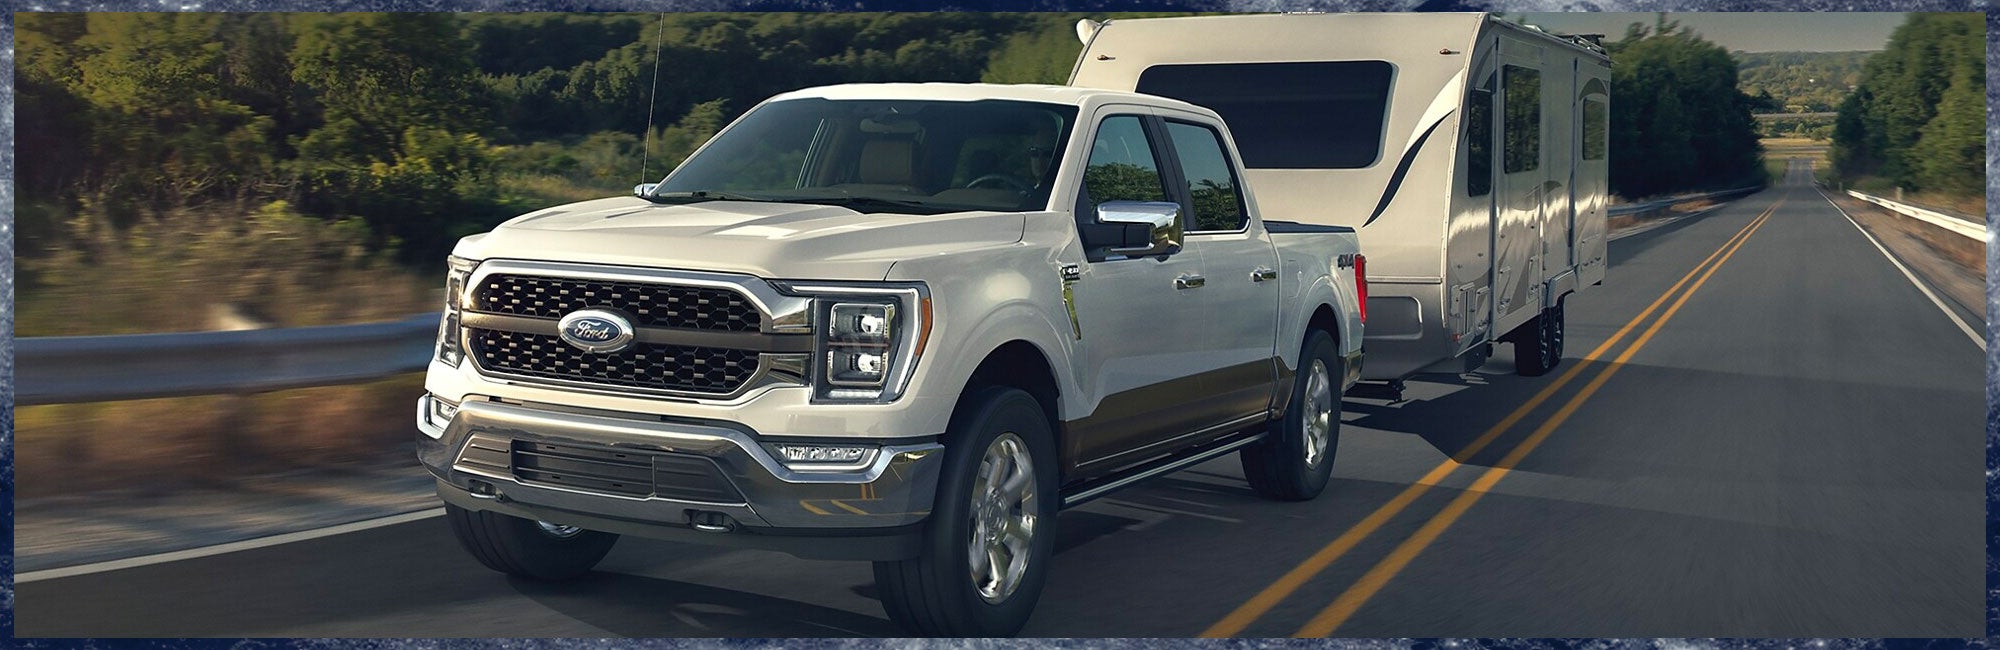 Ford F-150 Towing Capacity Specs